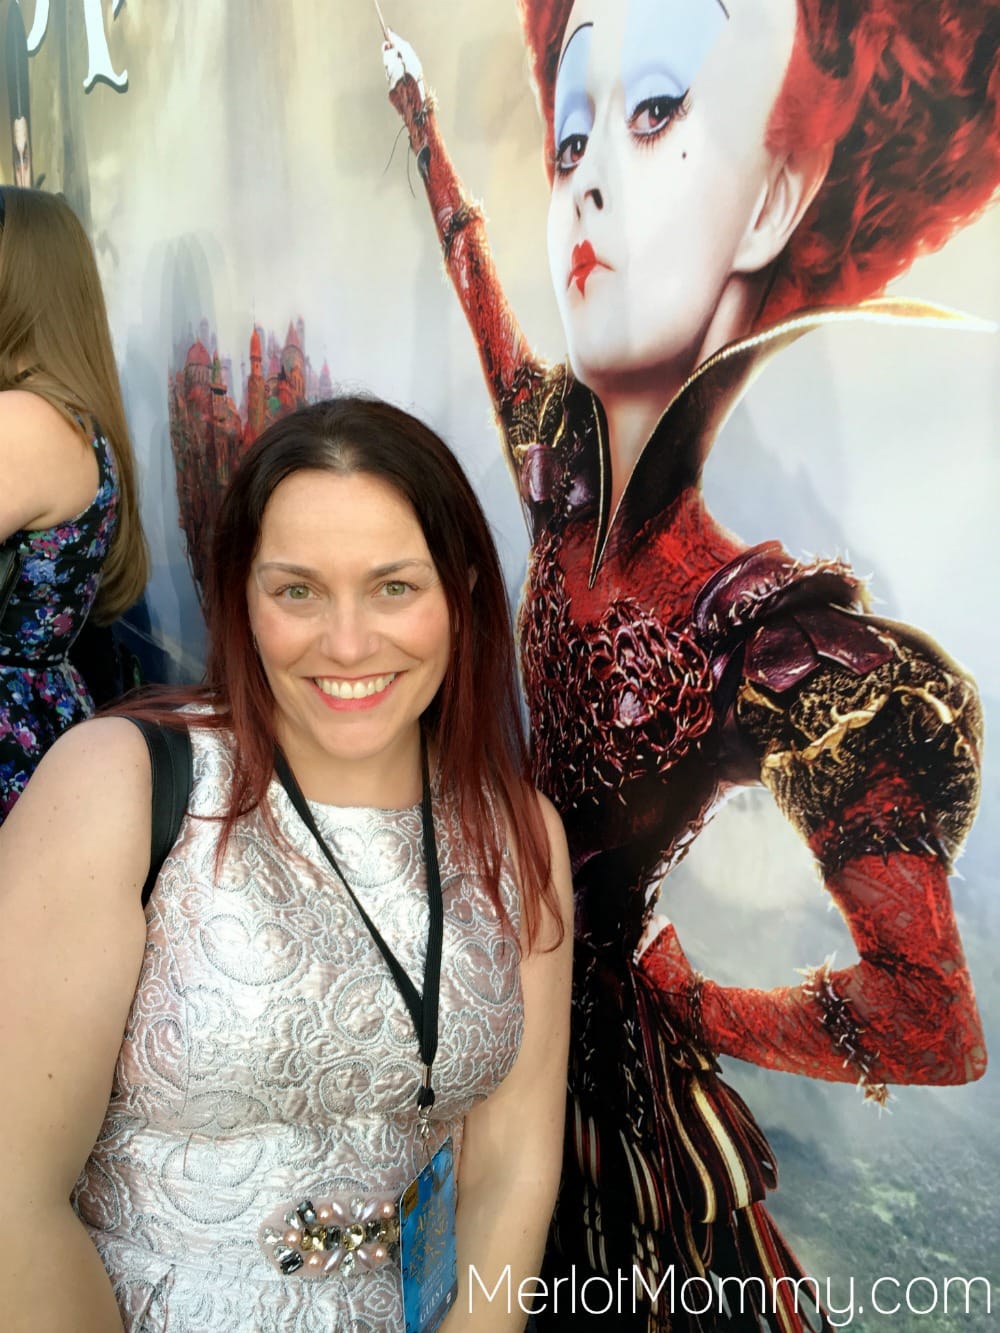 Behind-the-Scenes at the Alice Through the Looking Glass Red Carpet Premiere Event